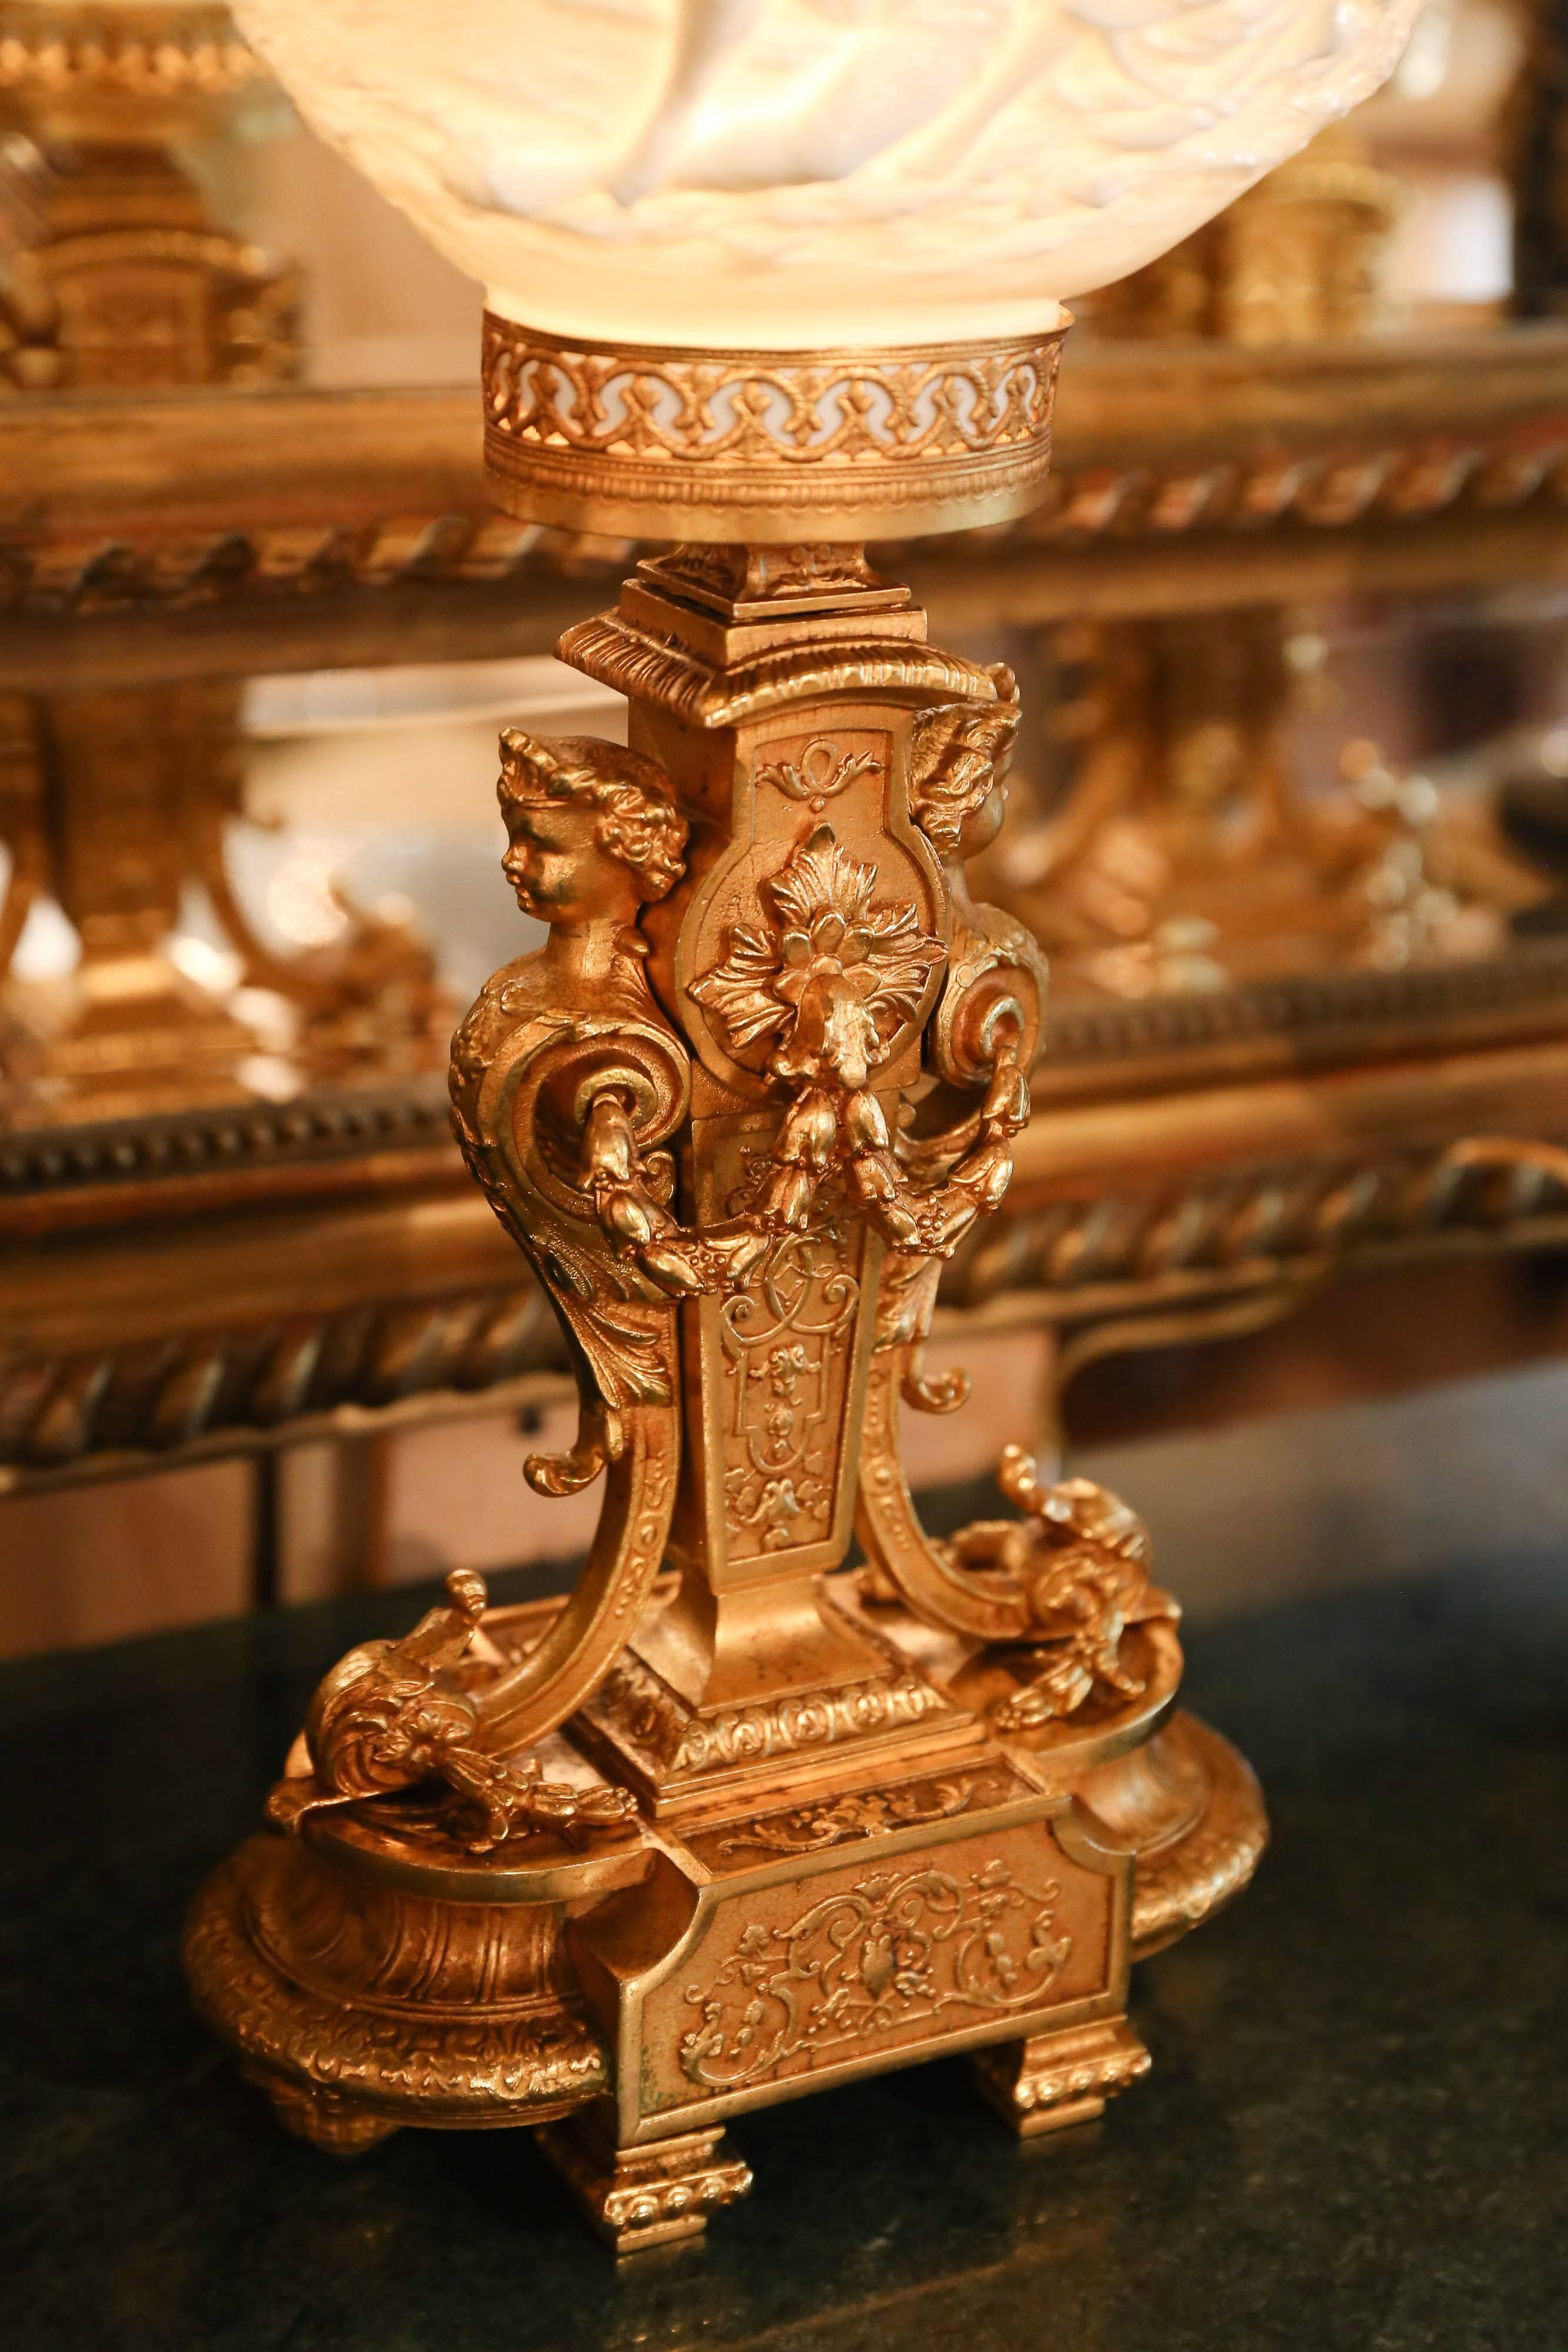 Pair of Italian porcelain and gilded bronze table lamps, Tiche porcelain shades
topped with gilt bronze flowers, showing low relief scene of courting couple
on one side, landscape with castle on opposing side, over gilt bronze base
decorated with